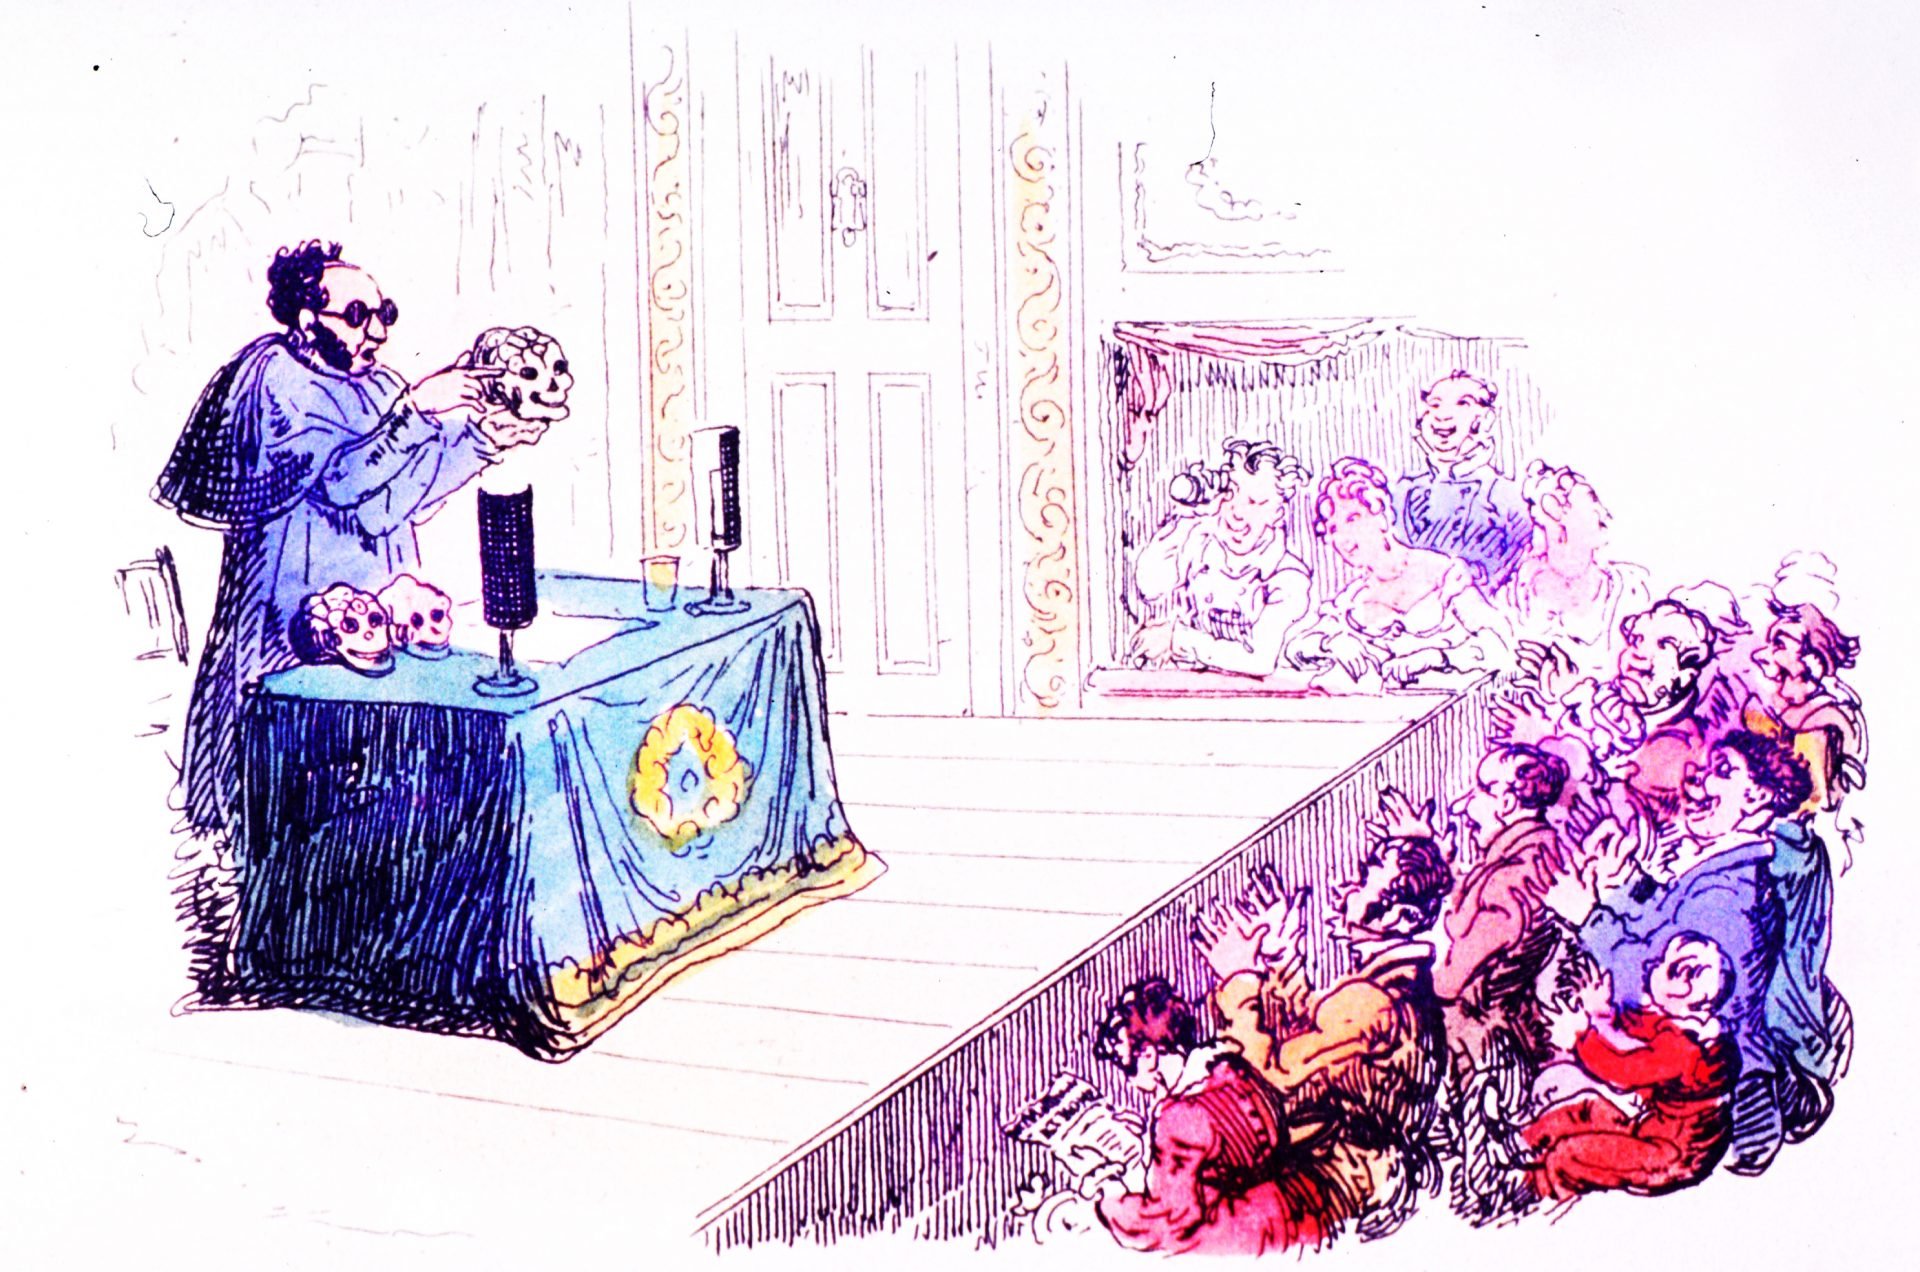 An illustration of a man performing a Phrenological analysis on a skull in front of an excited audience. The man is standing behind a blue table with a black candle and skulls on it.